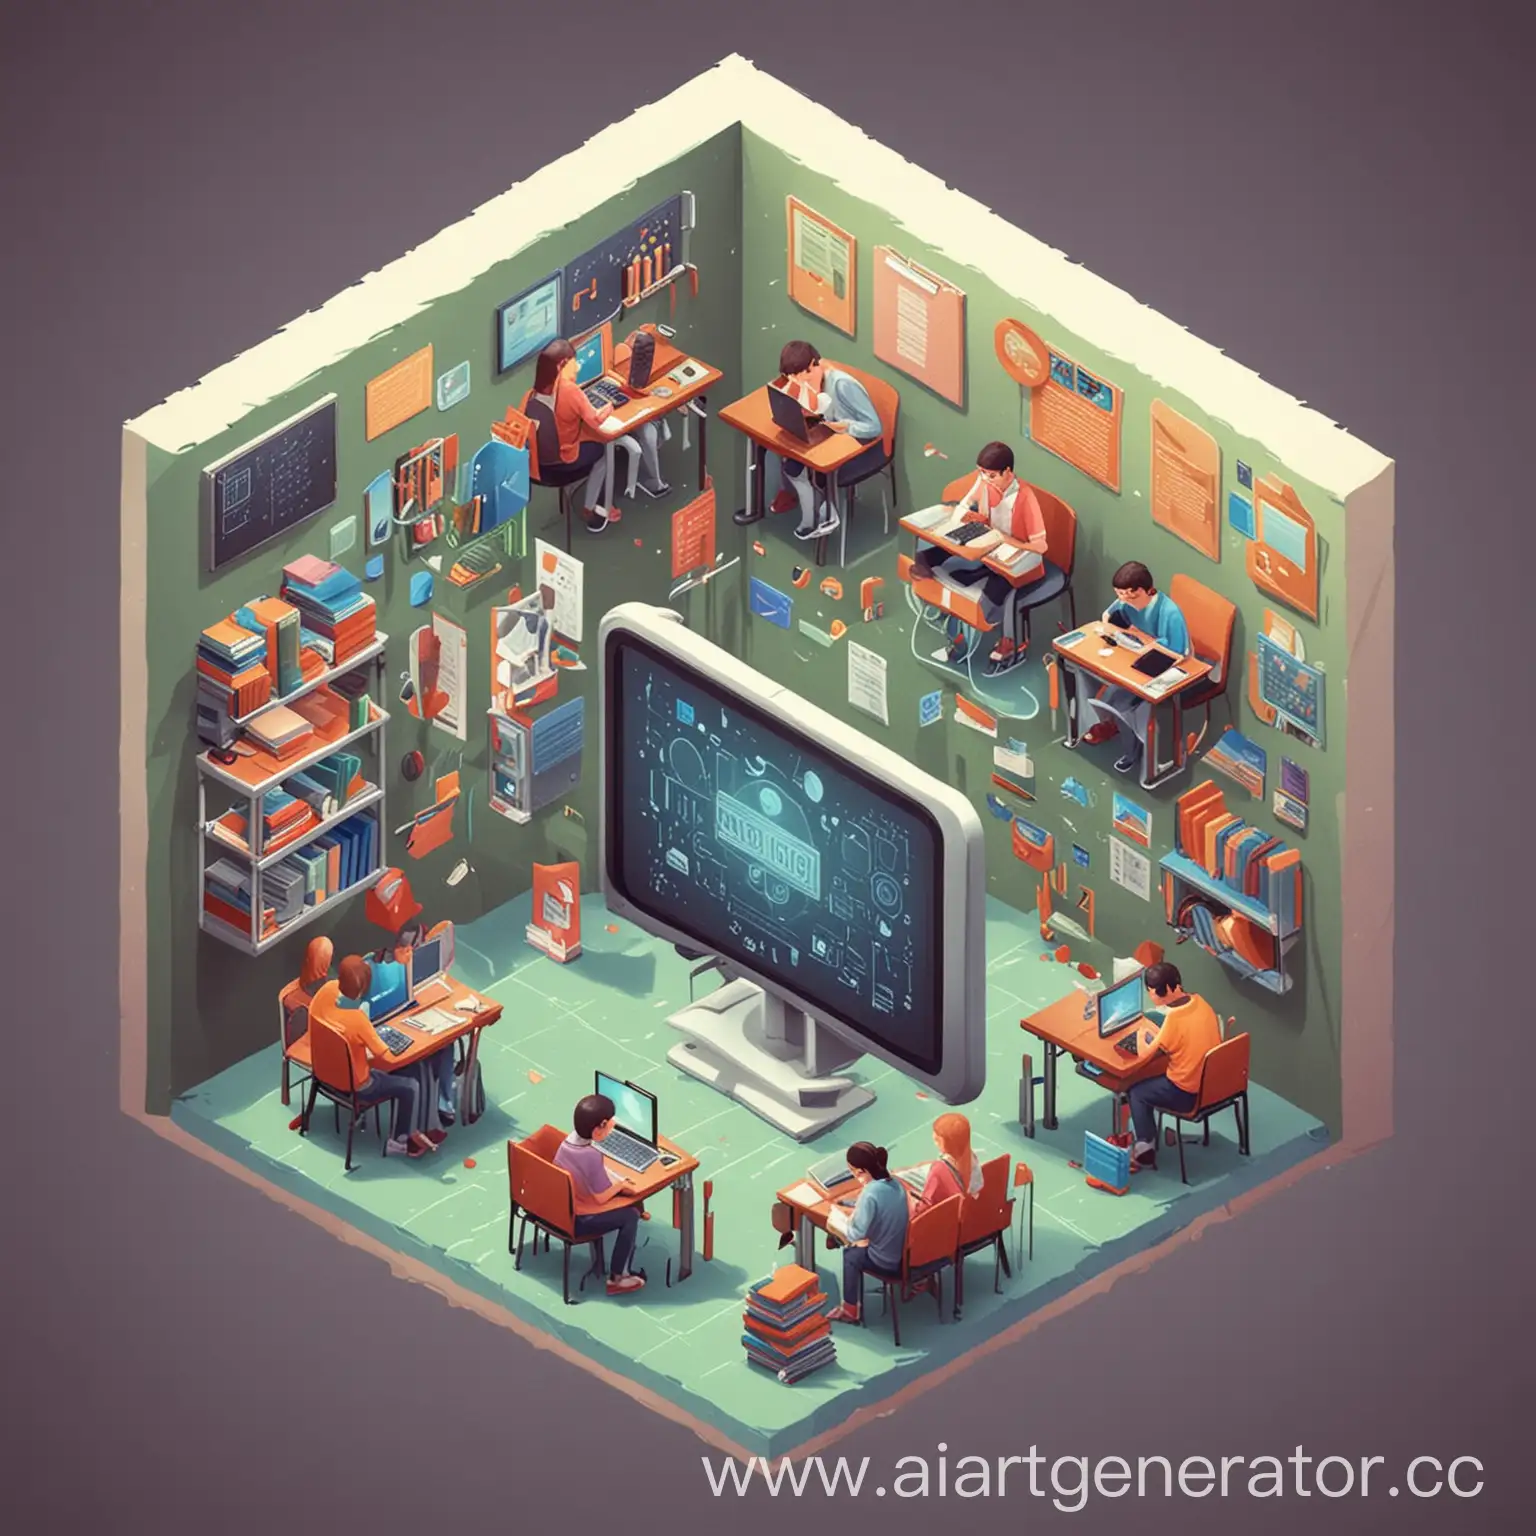 Isometric-Illustration-of-Electronic-Learning-in-School